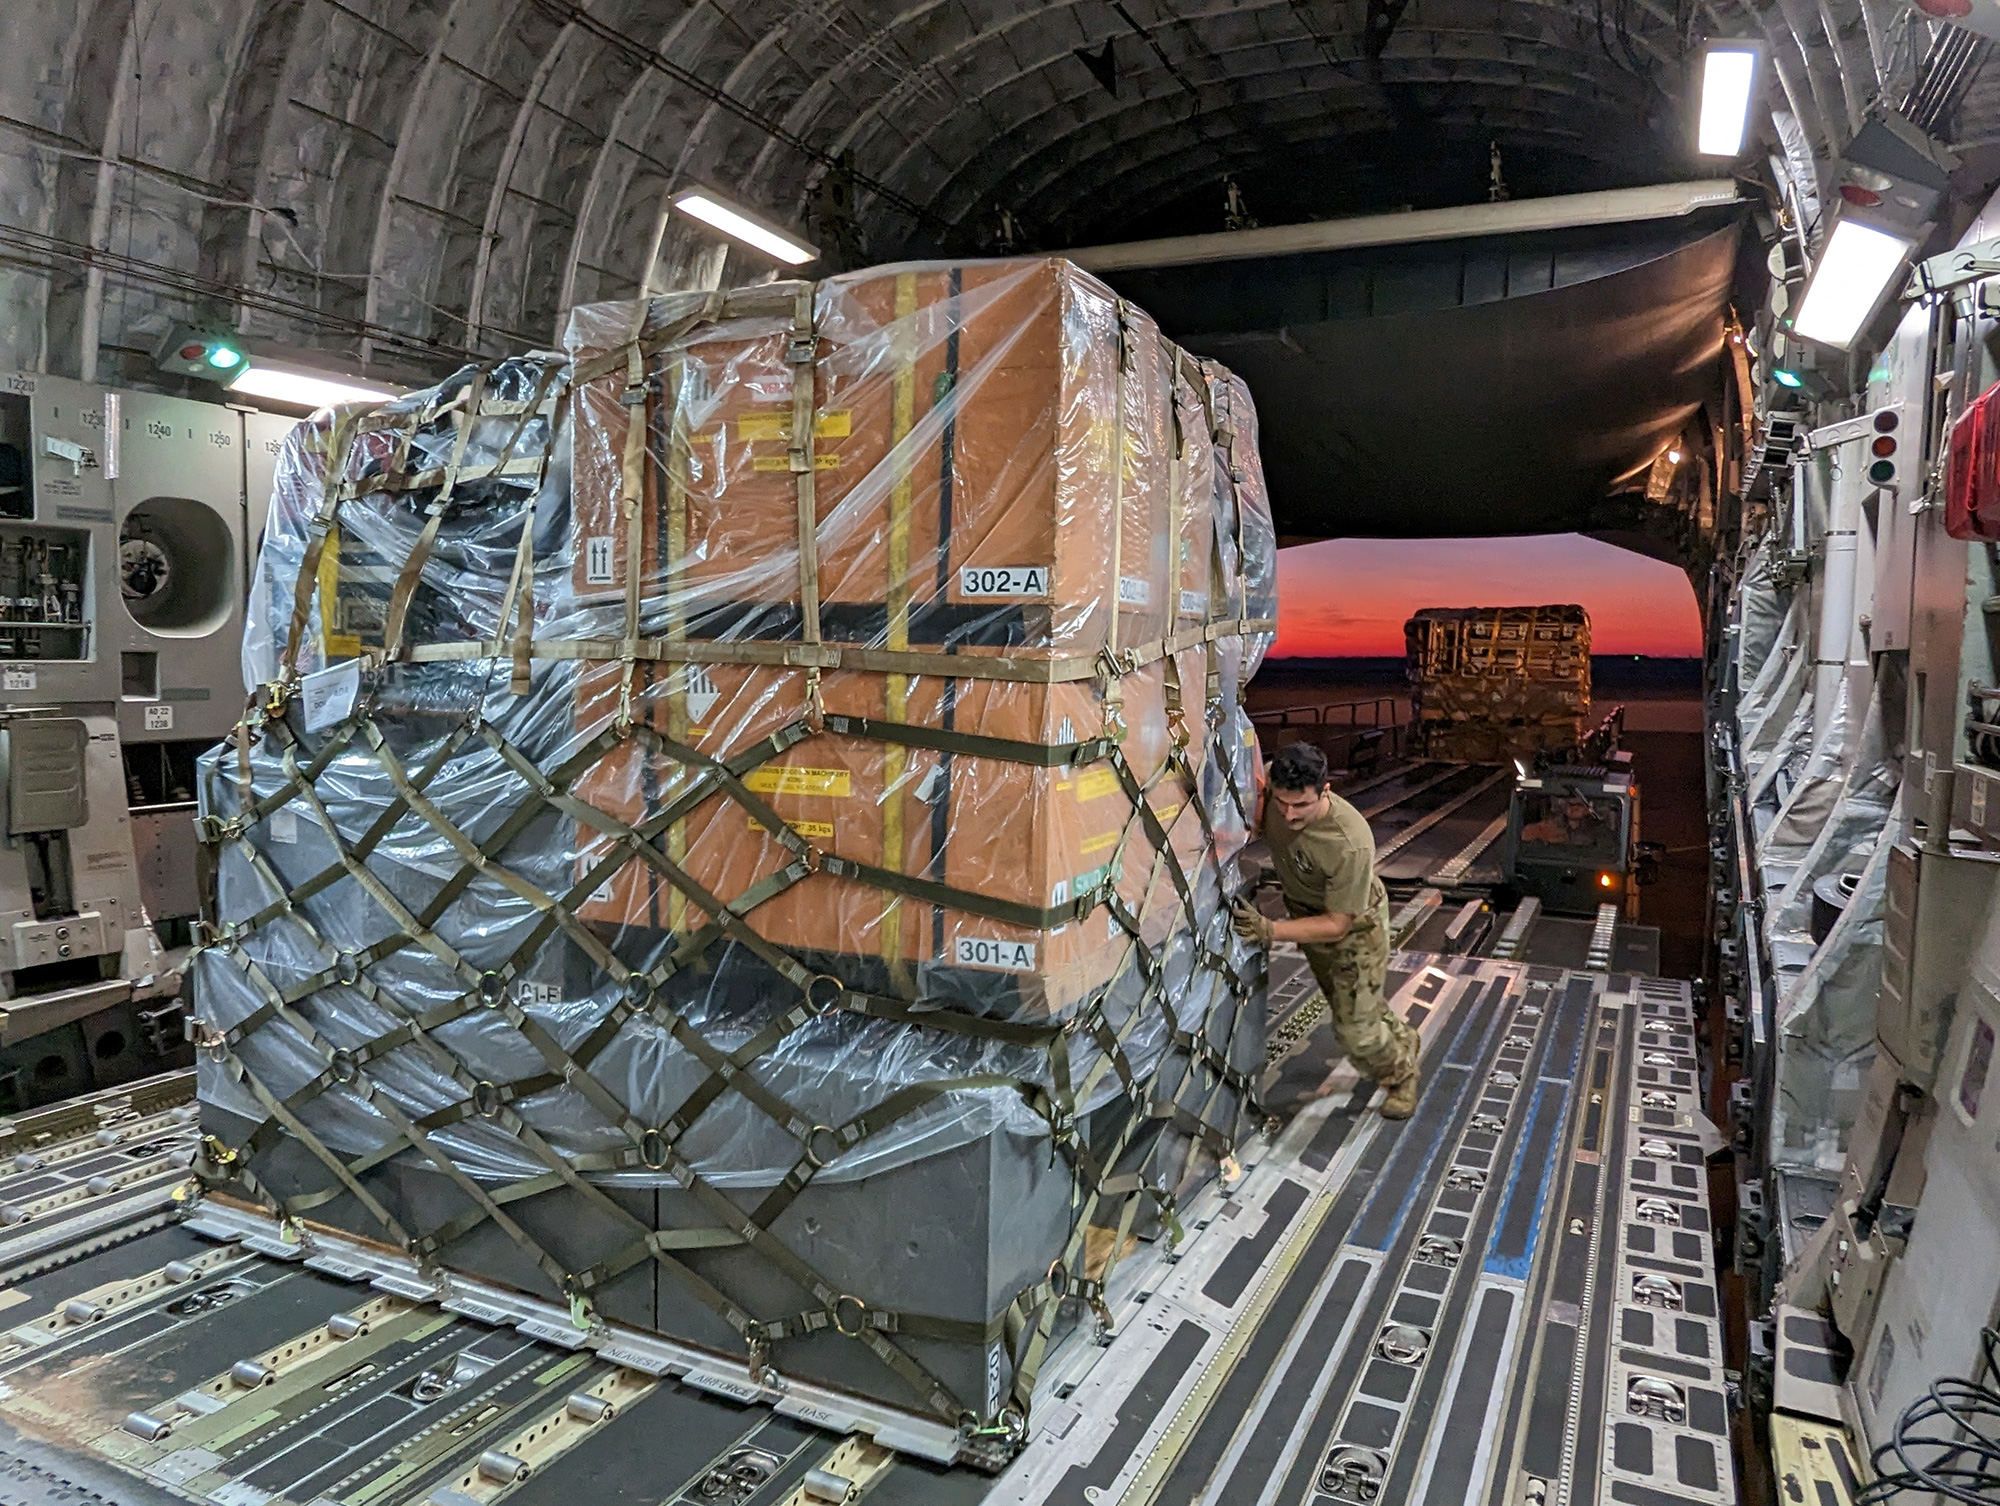 In this handout photo released on February 7, equipment and supplies for the Urban Search and Rescue team from Fairfax, Virginia, and USAID are loaded onto a transport plane to help in support operations for victims of the earthquake in Turkey, at Dover Air Force Base, Delaware.